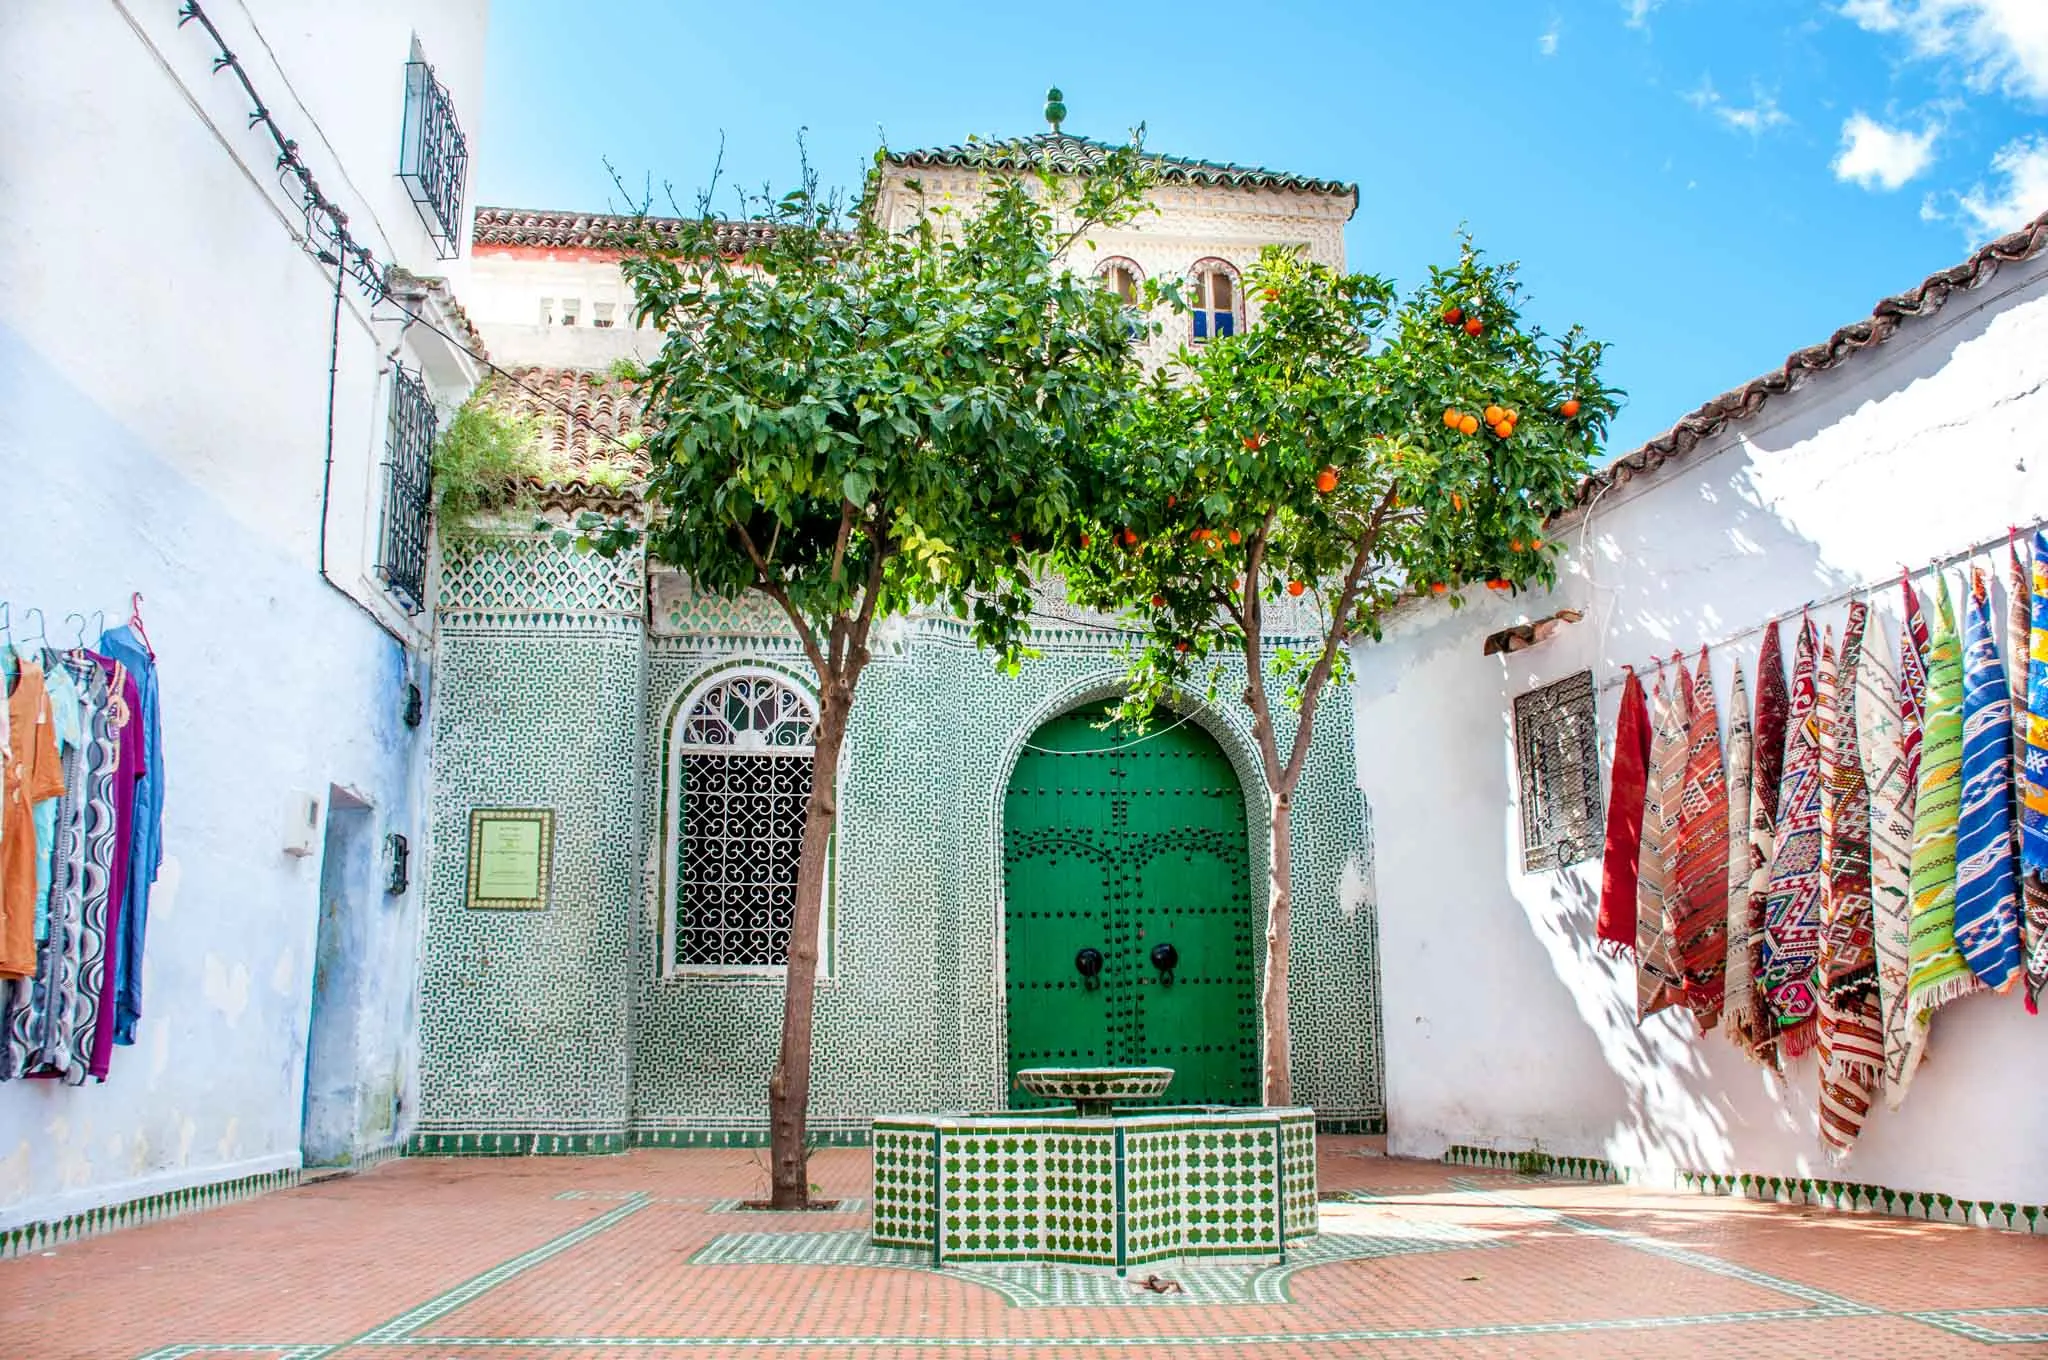 Green courtyard with orange trees